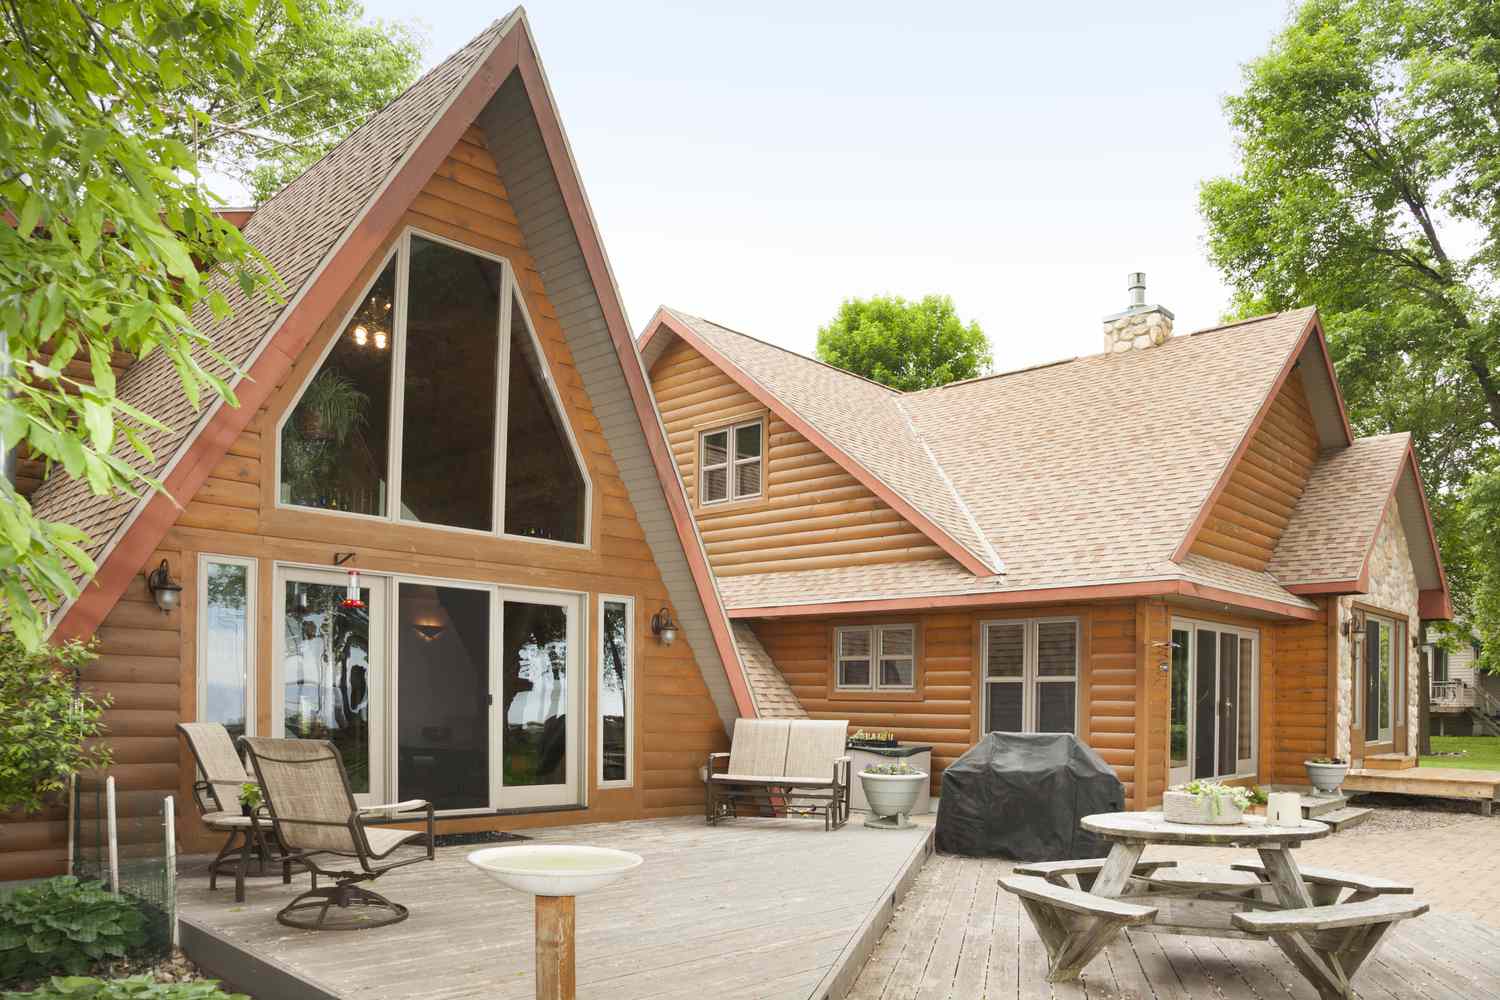 A-Frame log cabin with outdoor seating on wooden deck